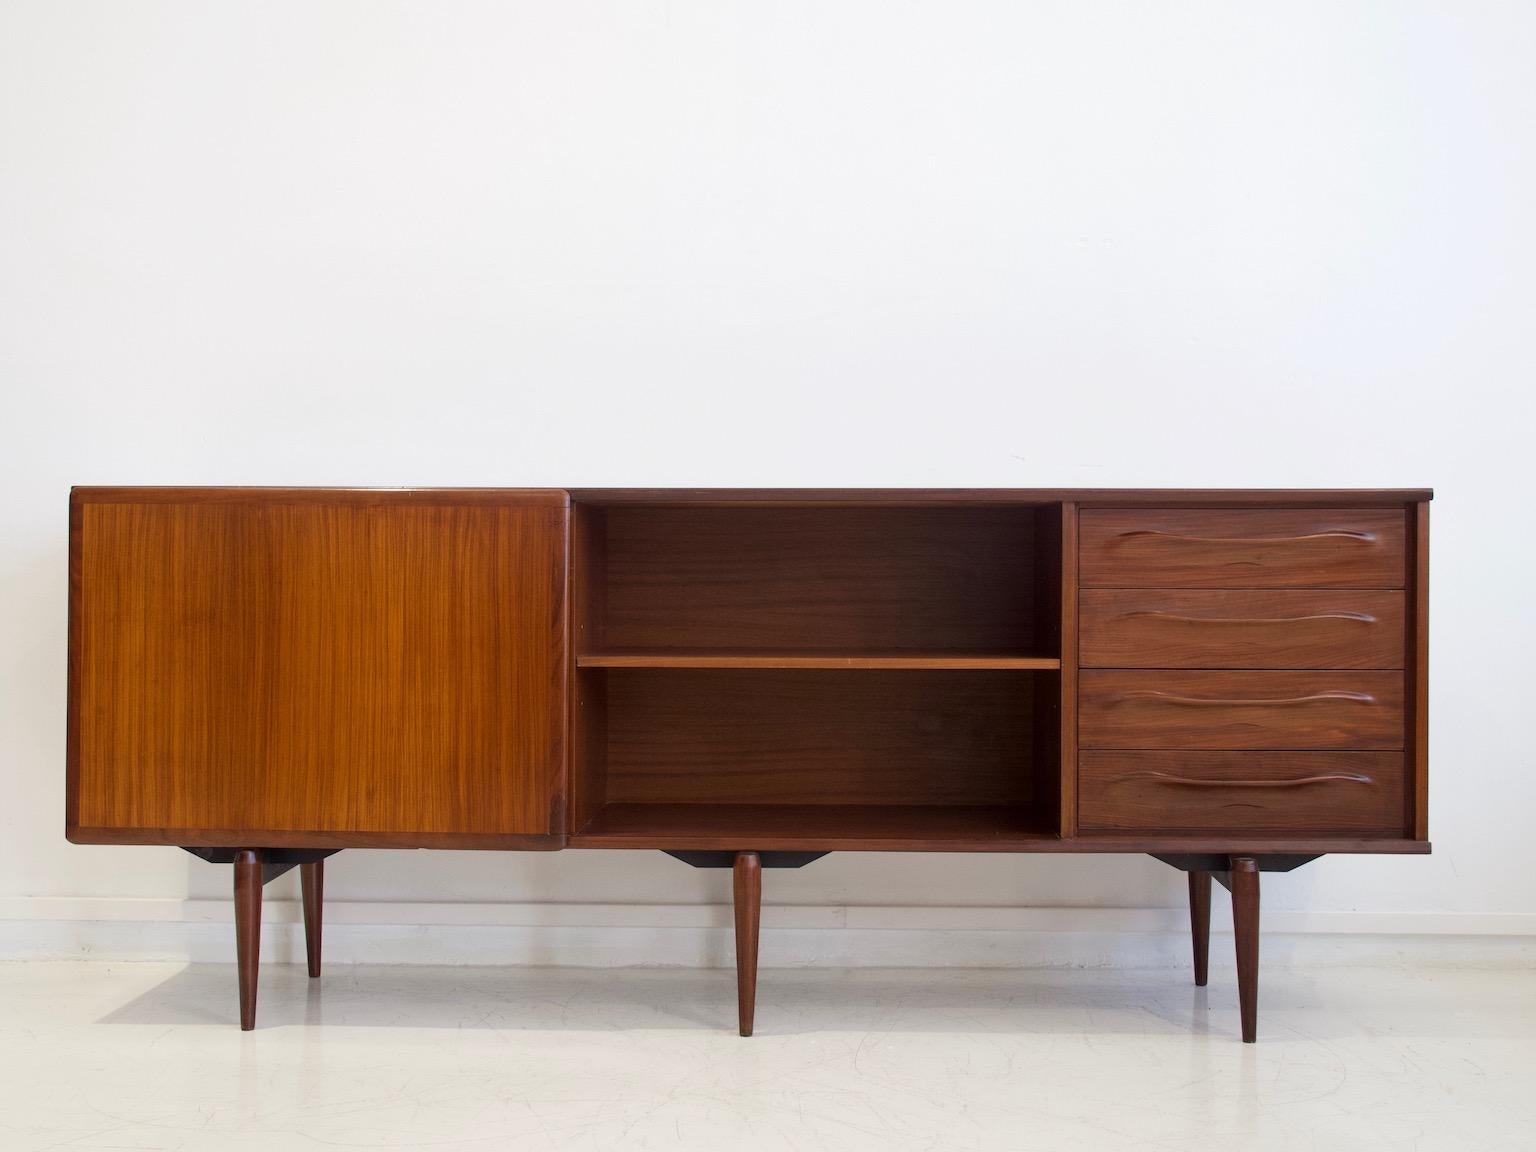 Sideboard veneered with teak, circa 1950-1960. Produced by Amma in Italy. Fitted with sliding doors, drawers and interior shelves. The surface has been restored, minor signs of age-related wear.